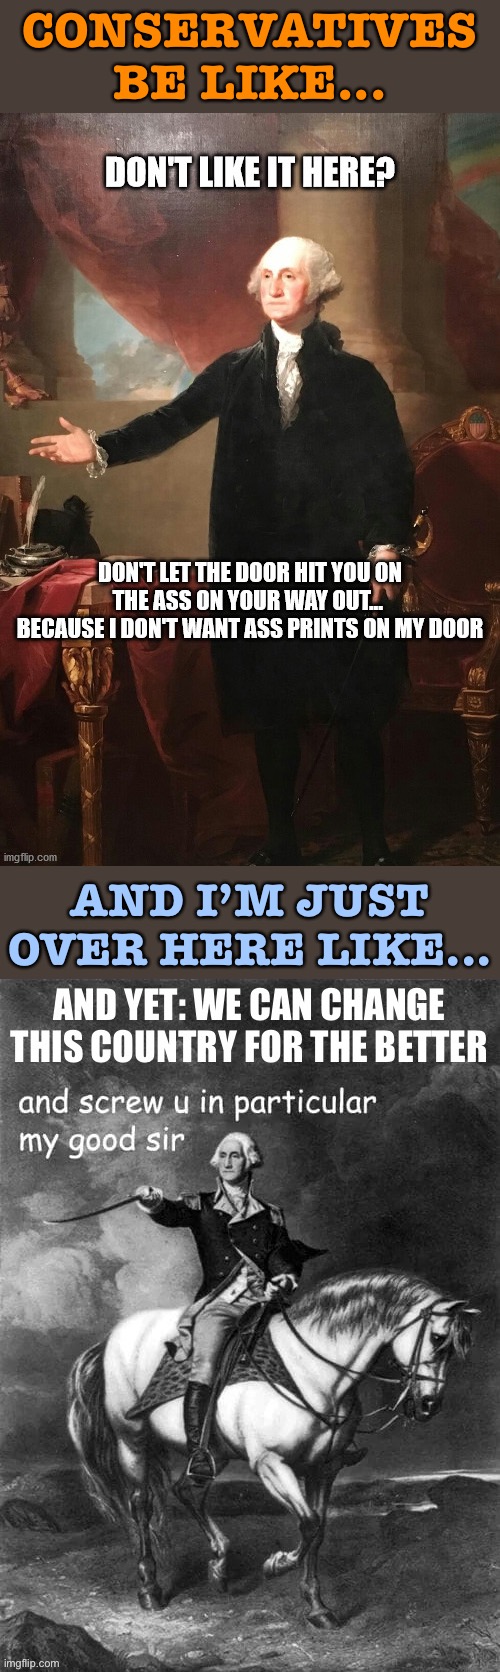 Don’t like it here? Stay and fight for change that will benefit everyone. | CONSERVATIVES BE LIKE... AND I’M JUST OVER HERE LIKE... | image tagged in conservative logic,george washington,patriotic,patriotism,america,change | made w/ Imgflip meme maker